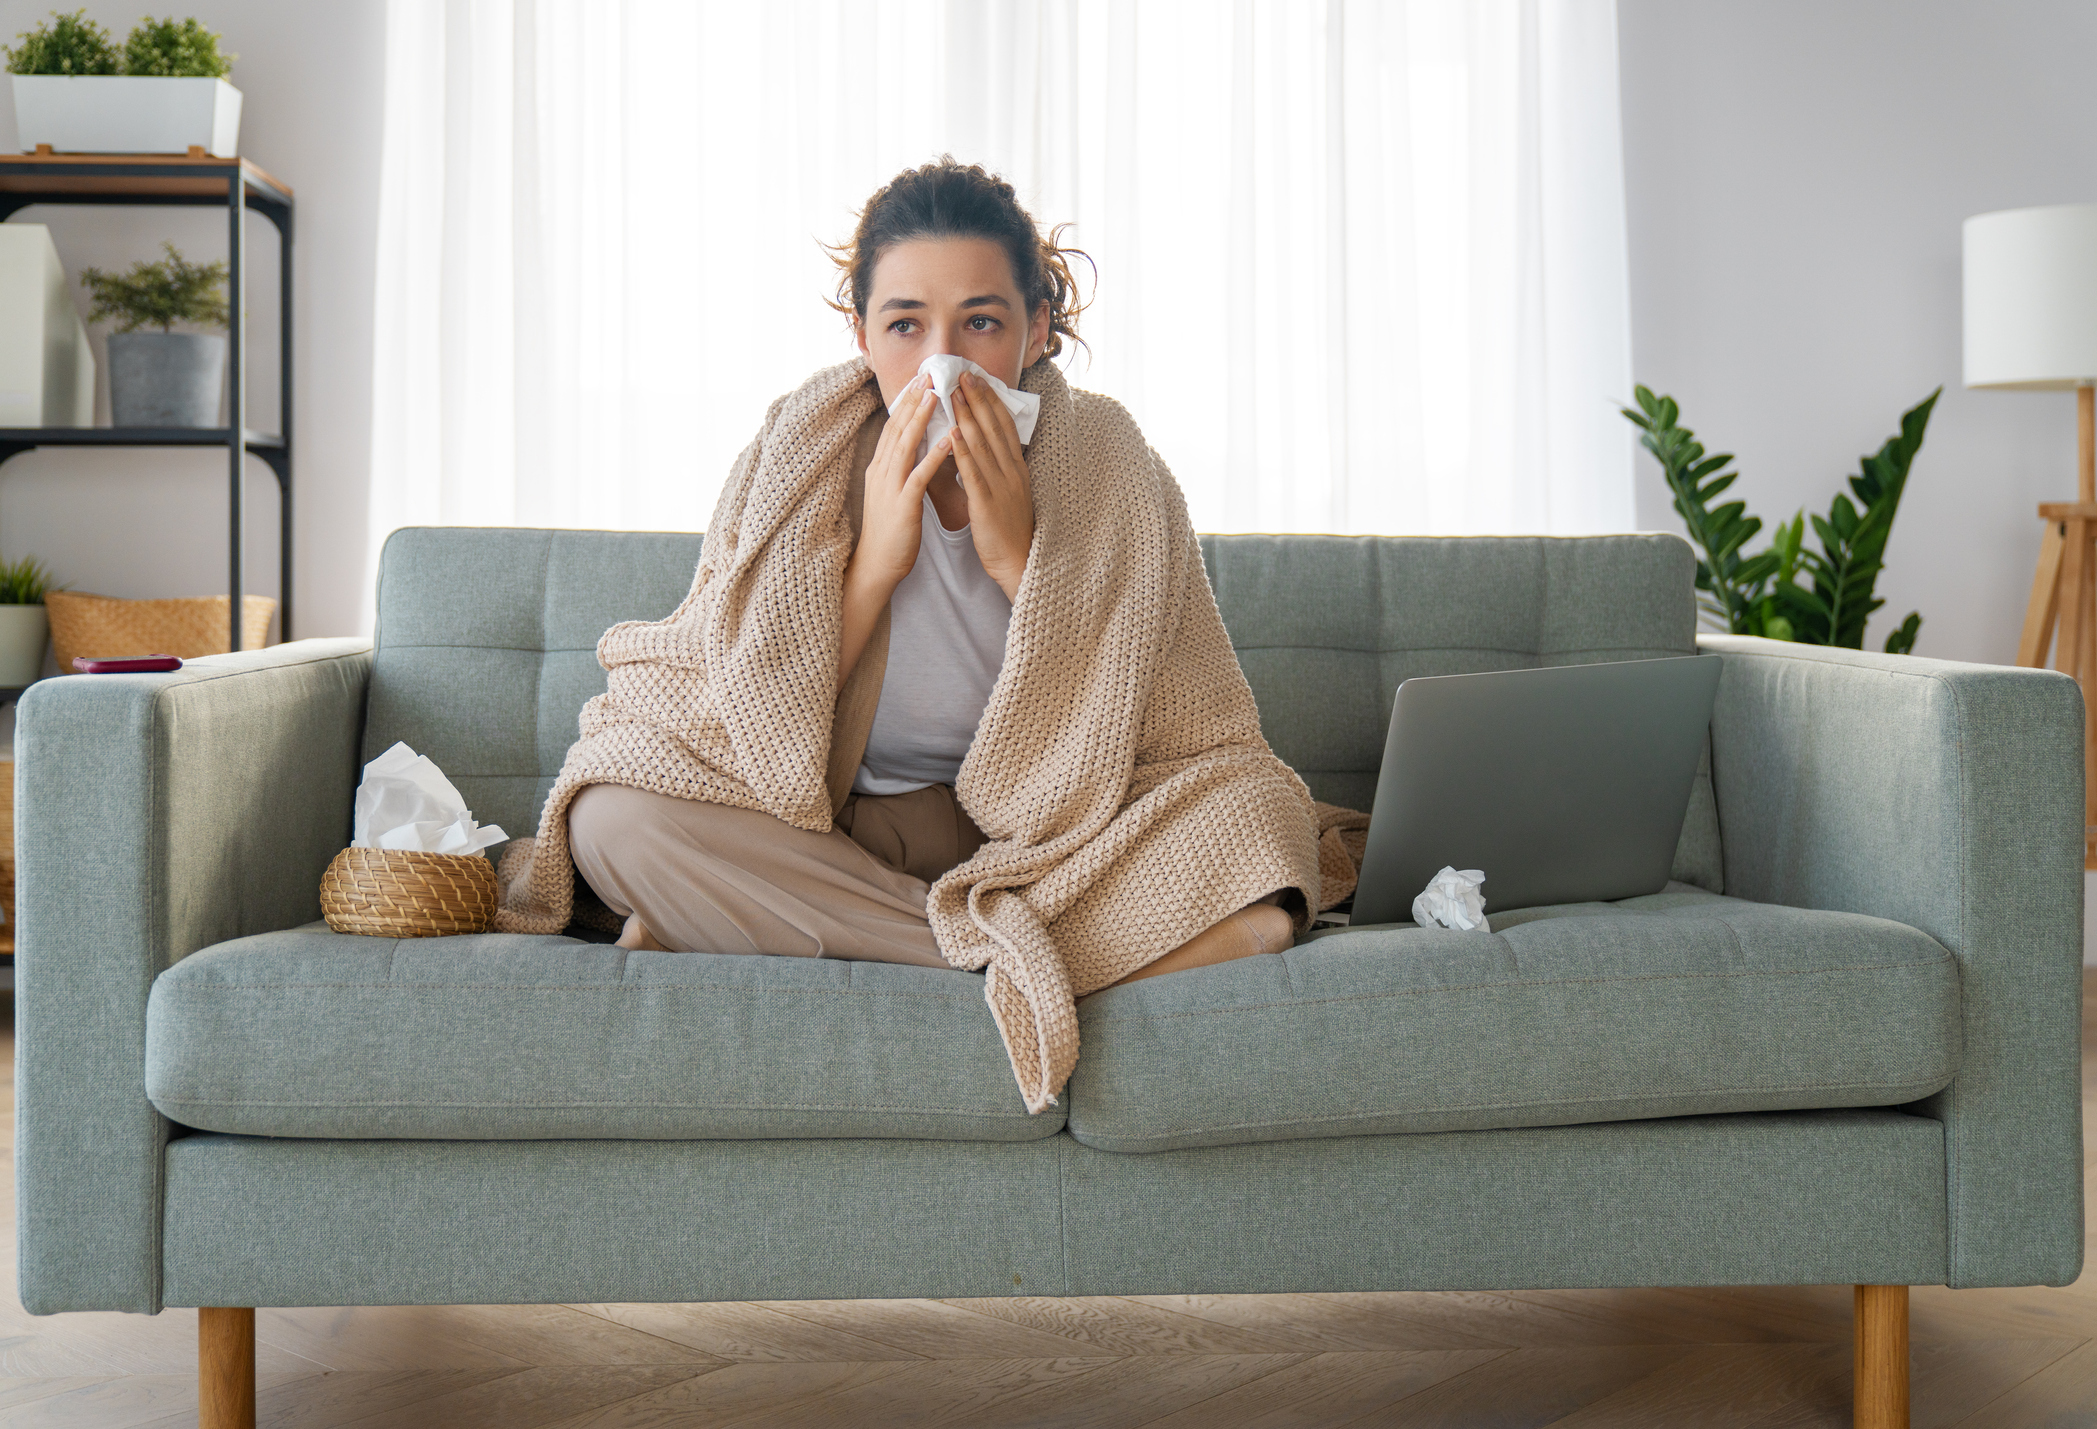 Sick woman sitting on couch, wrapped in a blanket